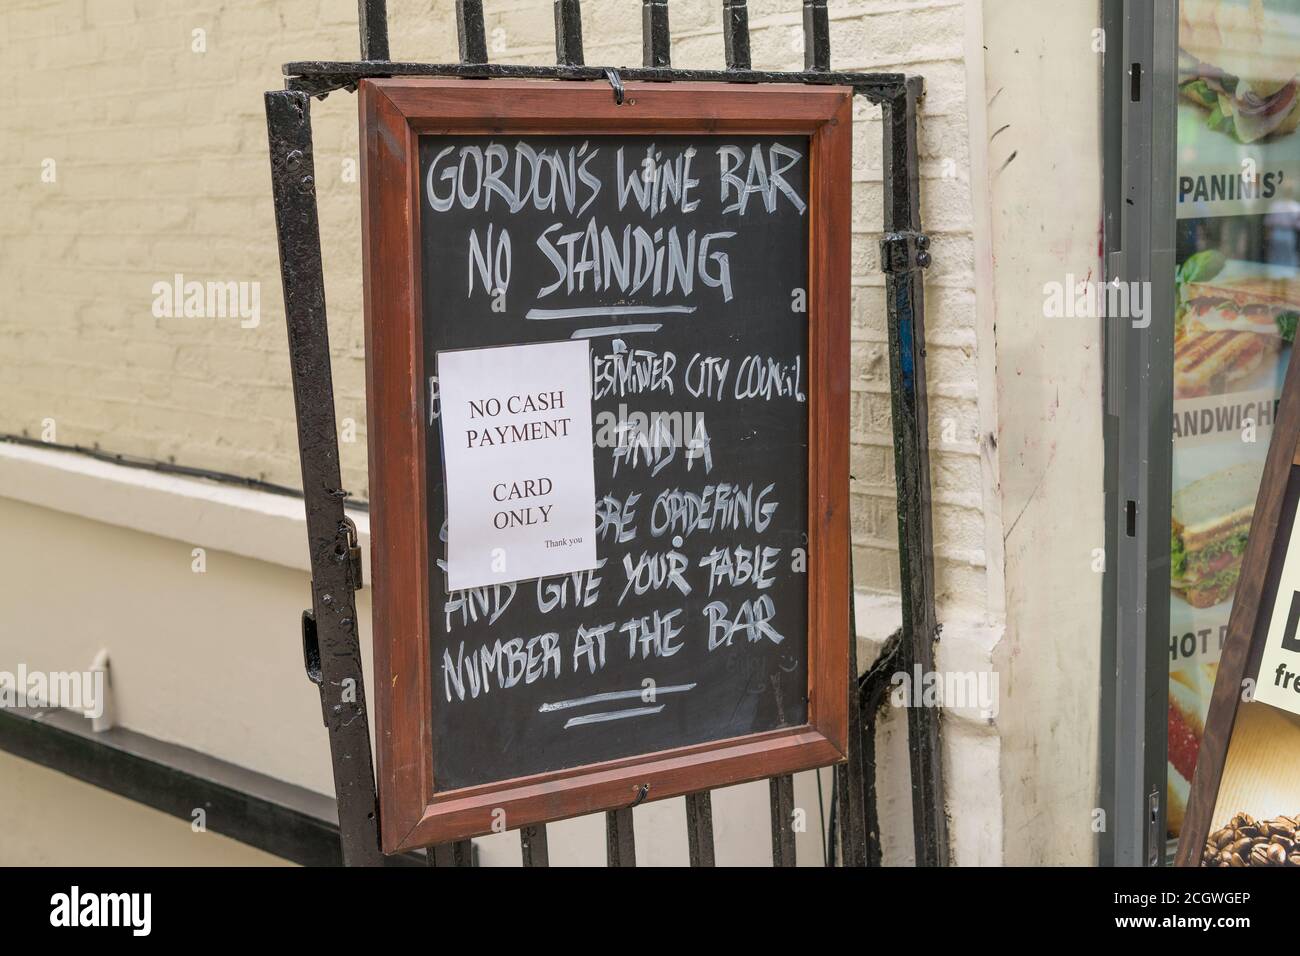 A sign outside Gordon's Wine Bar saying that the don't accept cash. London Stock Photo